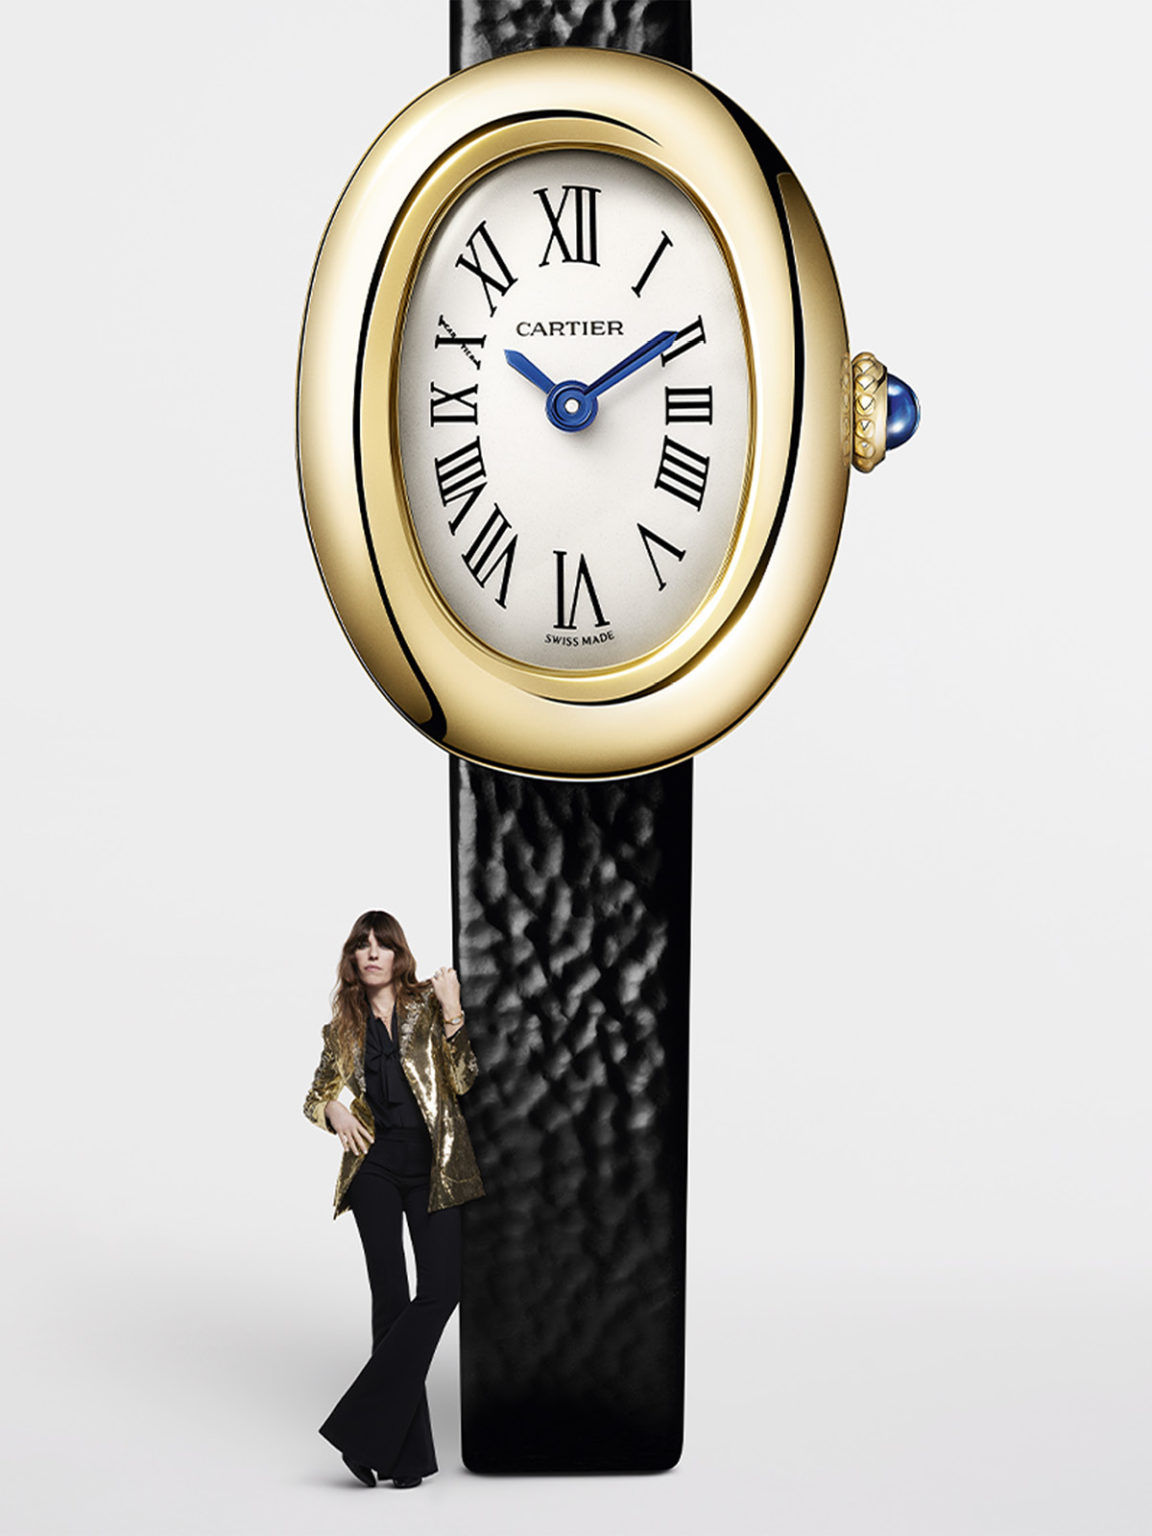 Lou Doillon is unveiled as the face of Cartier's Baignoire watch